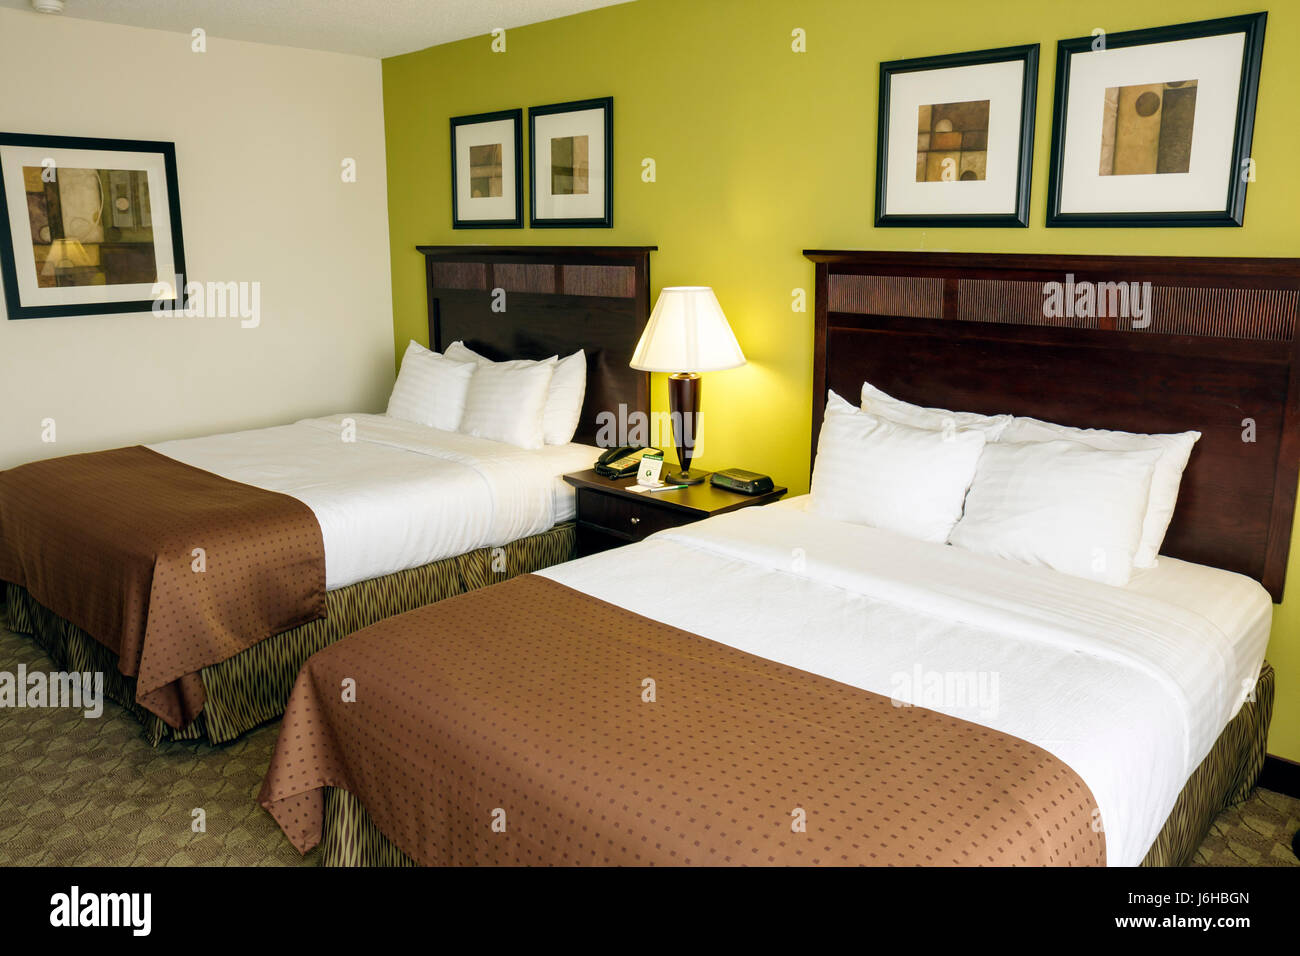 Virginia Roanoke,Holiday Inn,Tanglewood,chain,lodging,hotel,guest room,double bed,queen size,lamps,decor,interior design,VA090622043 Stock Photo